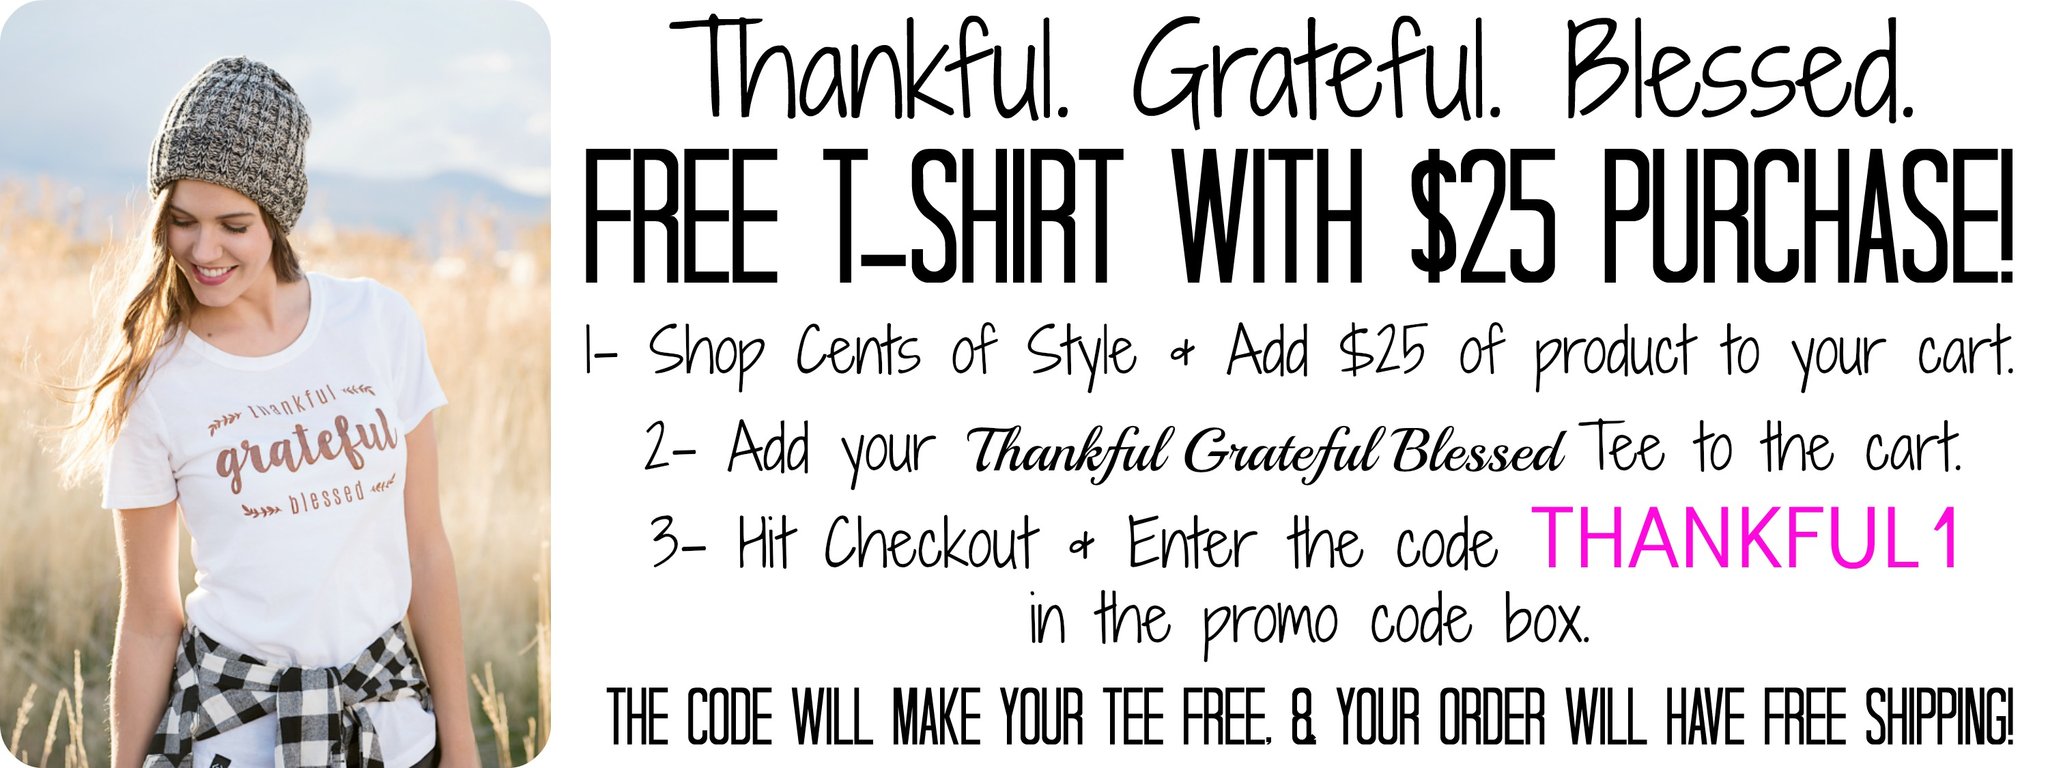 Fashion Friday! FREE t-shirt with $25 purchase! Free shipping!